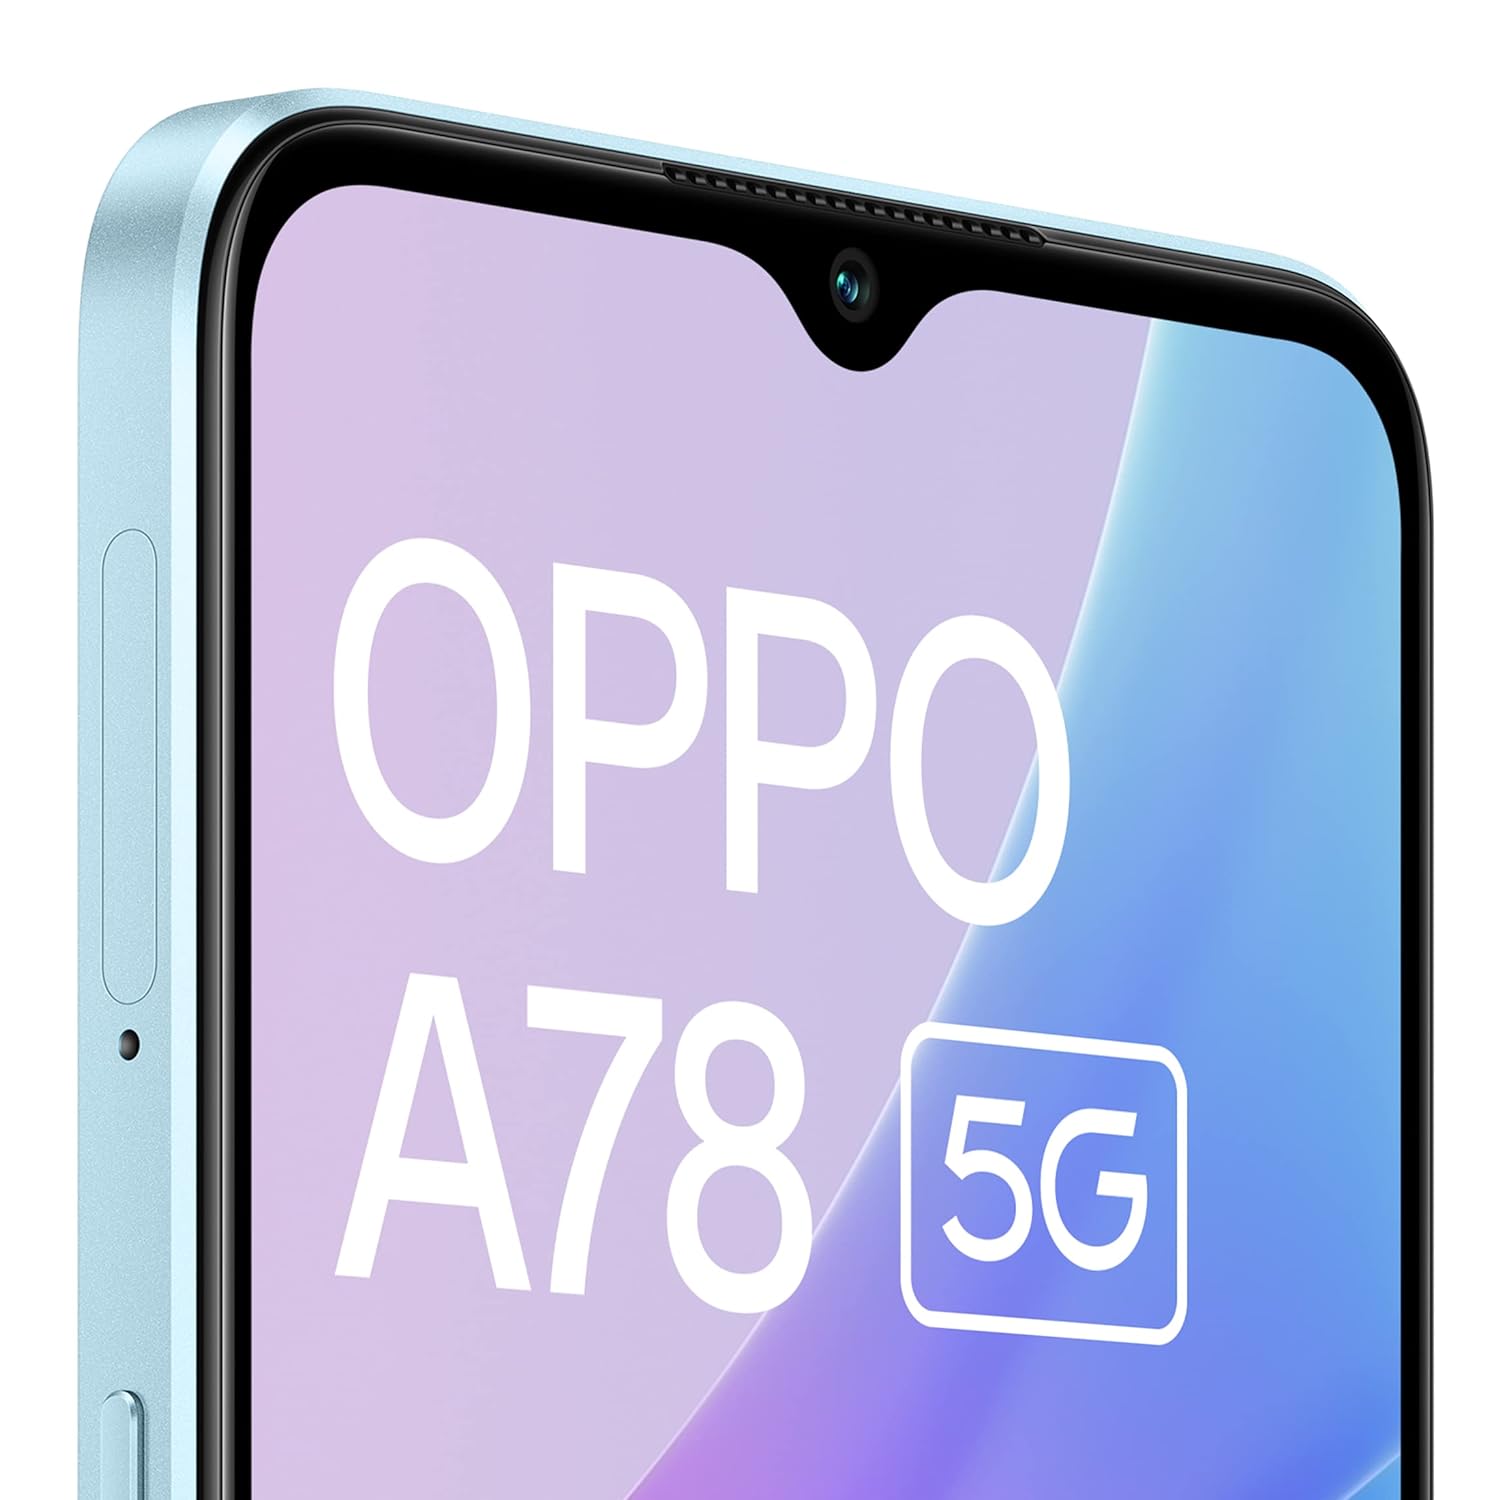 Oppo A78 5G review: Decent performance - Can Buy or Not